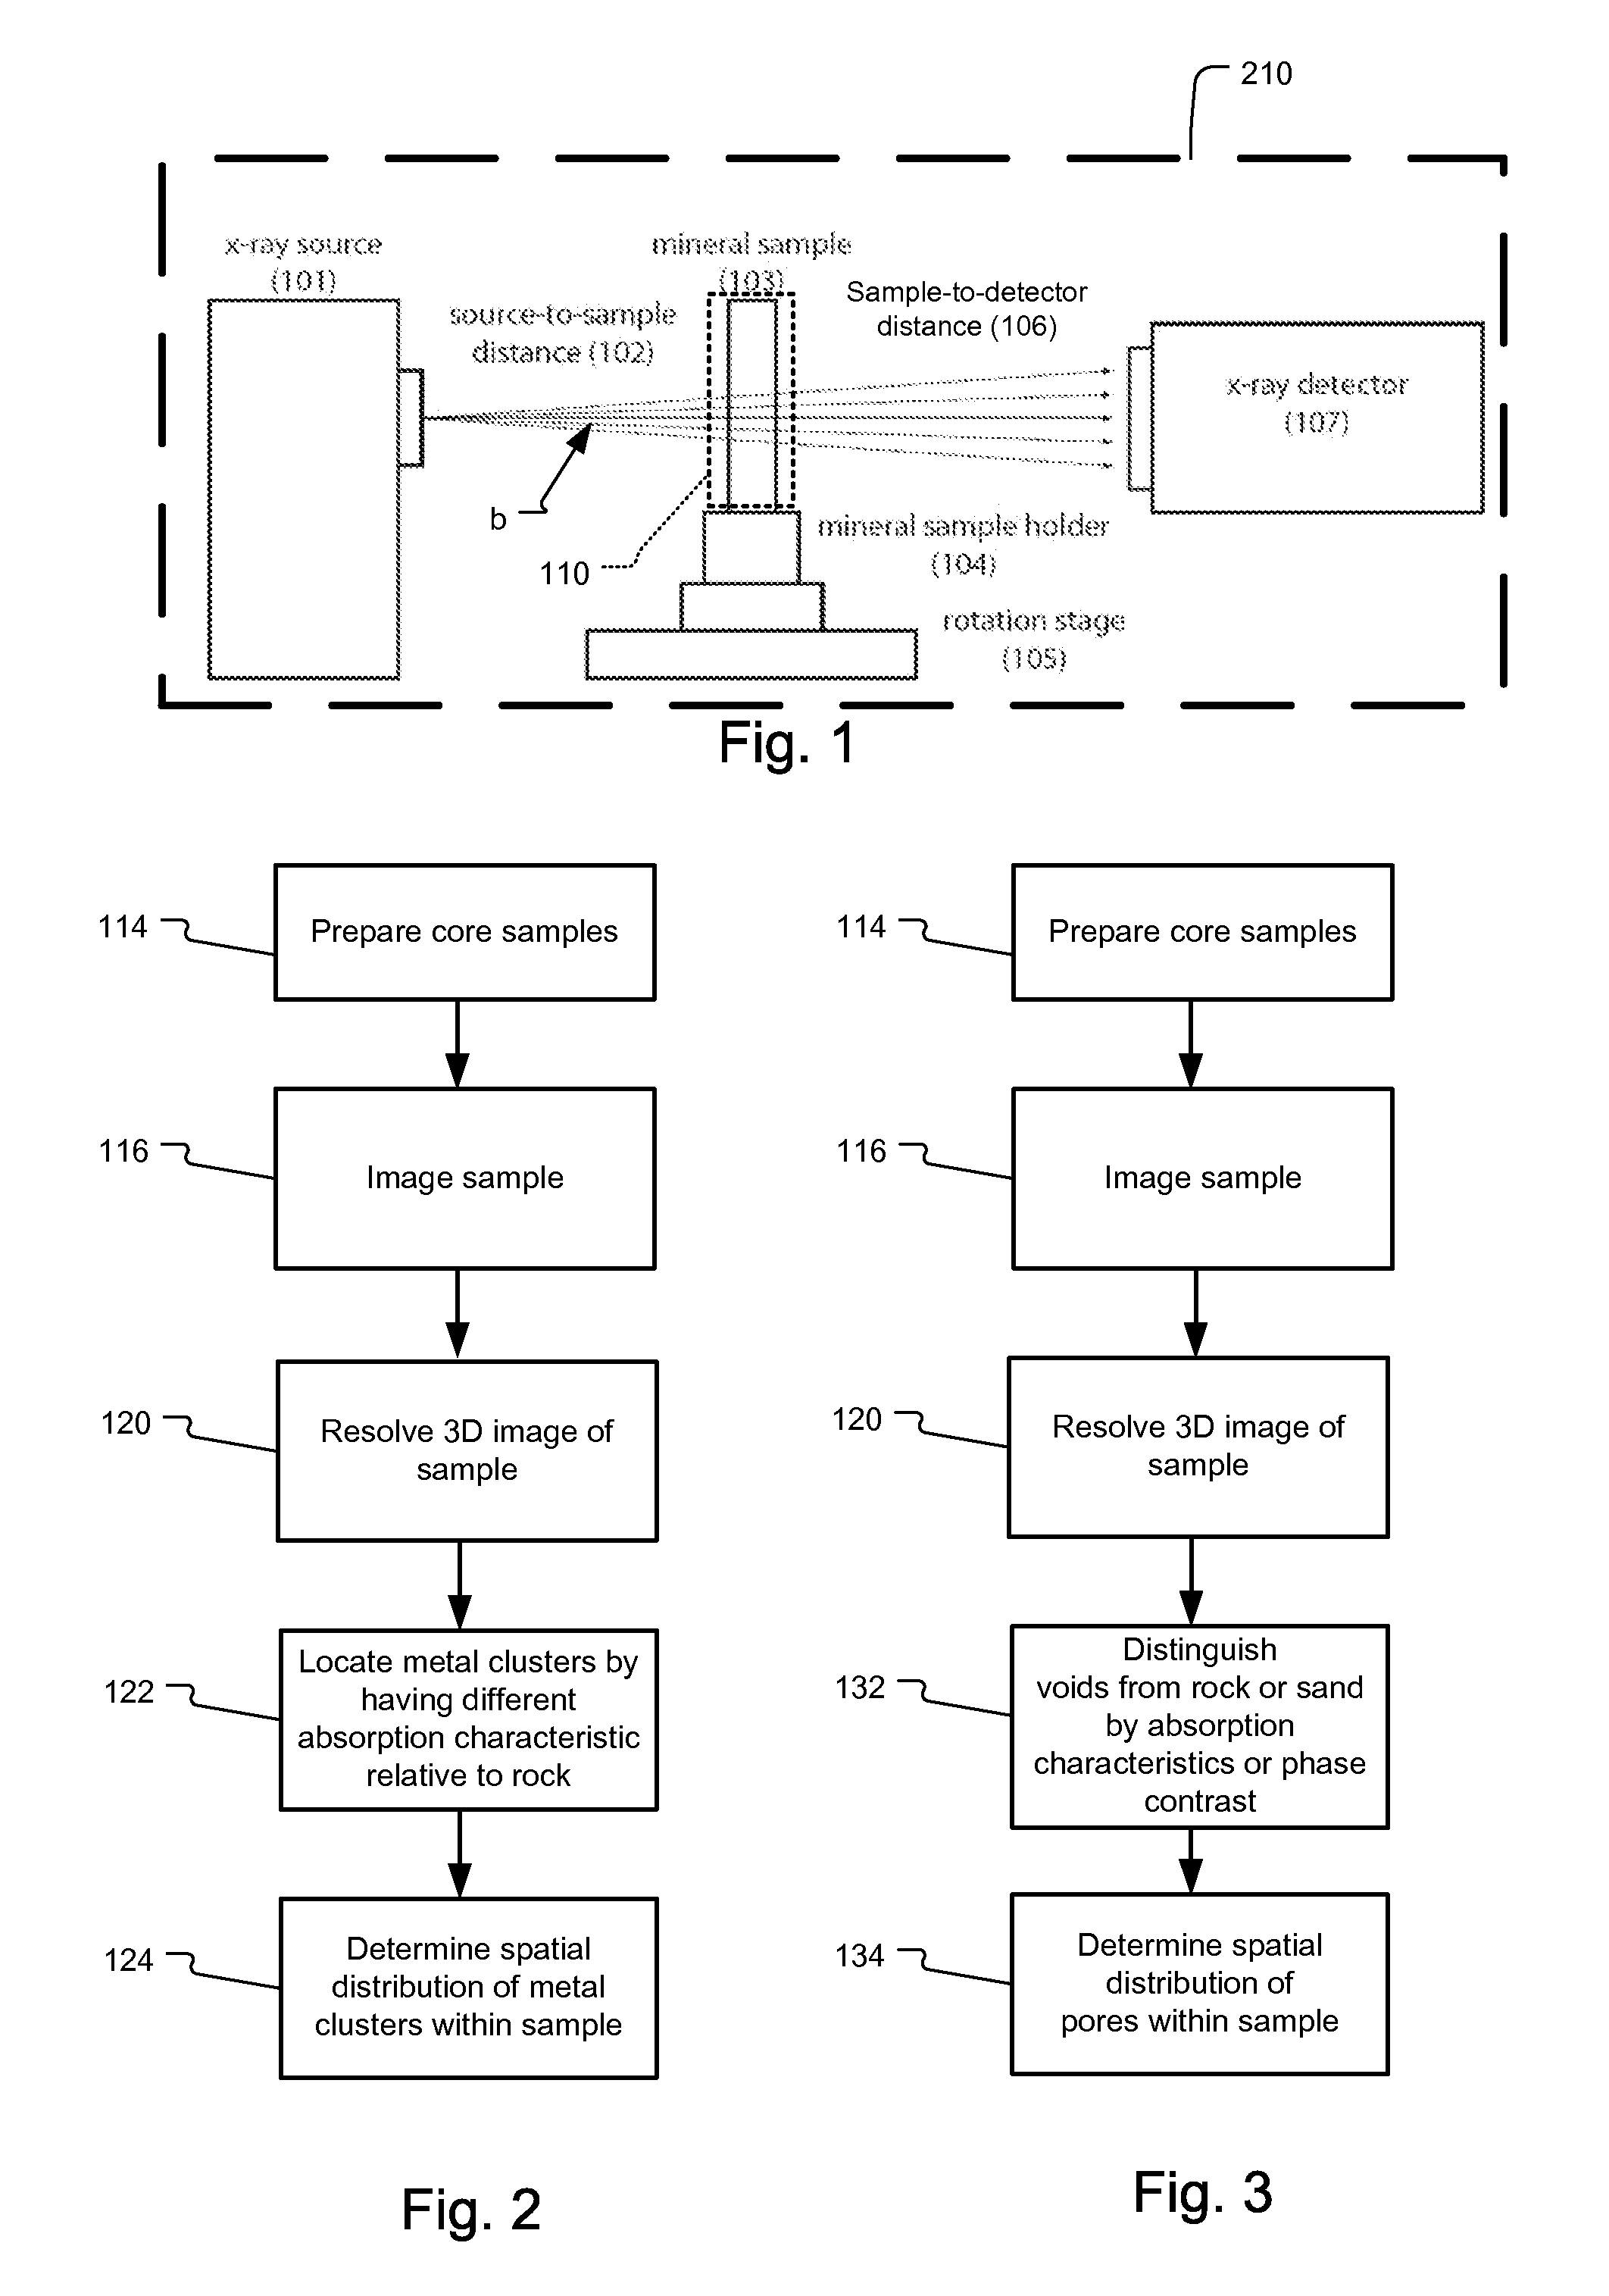 Process for examining mineral samples with X-ray microscope and projection systems